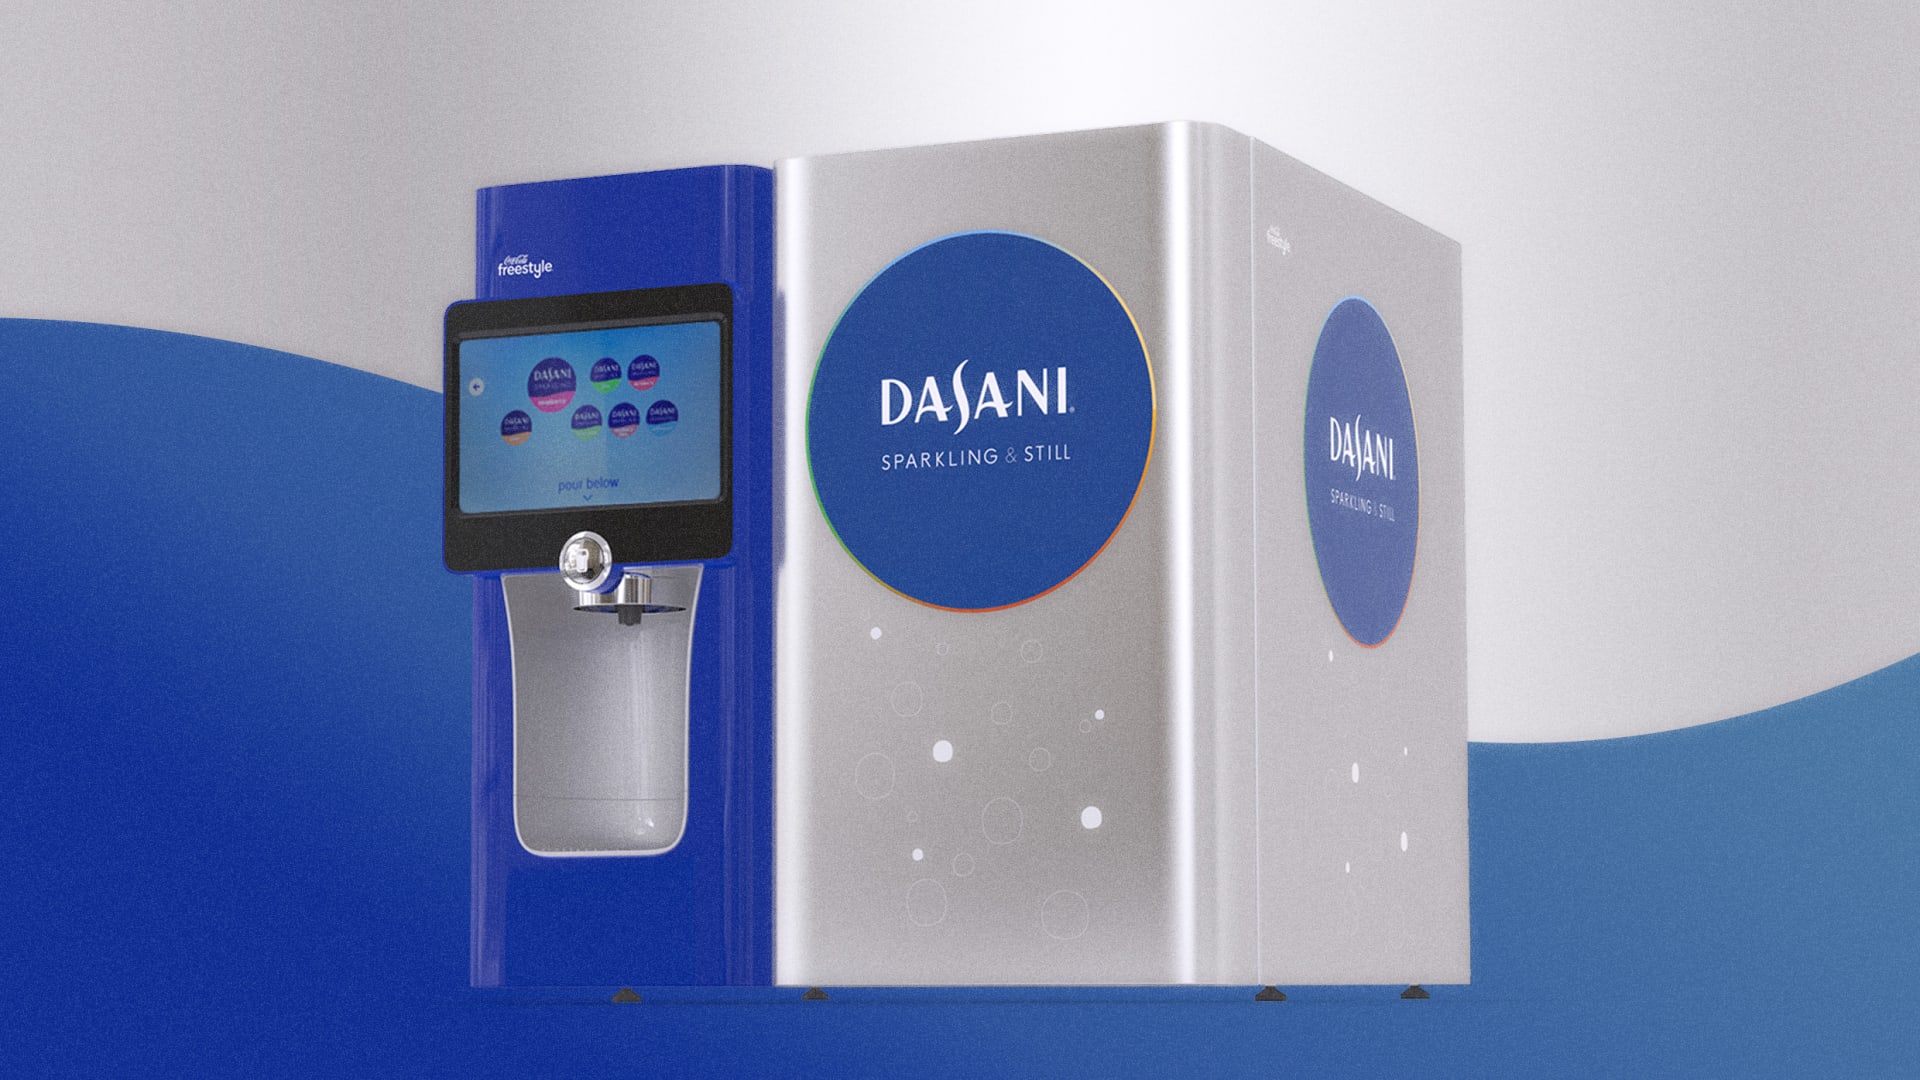 Dasani’s new water vending machine is BYOB (bring your own bottle)